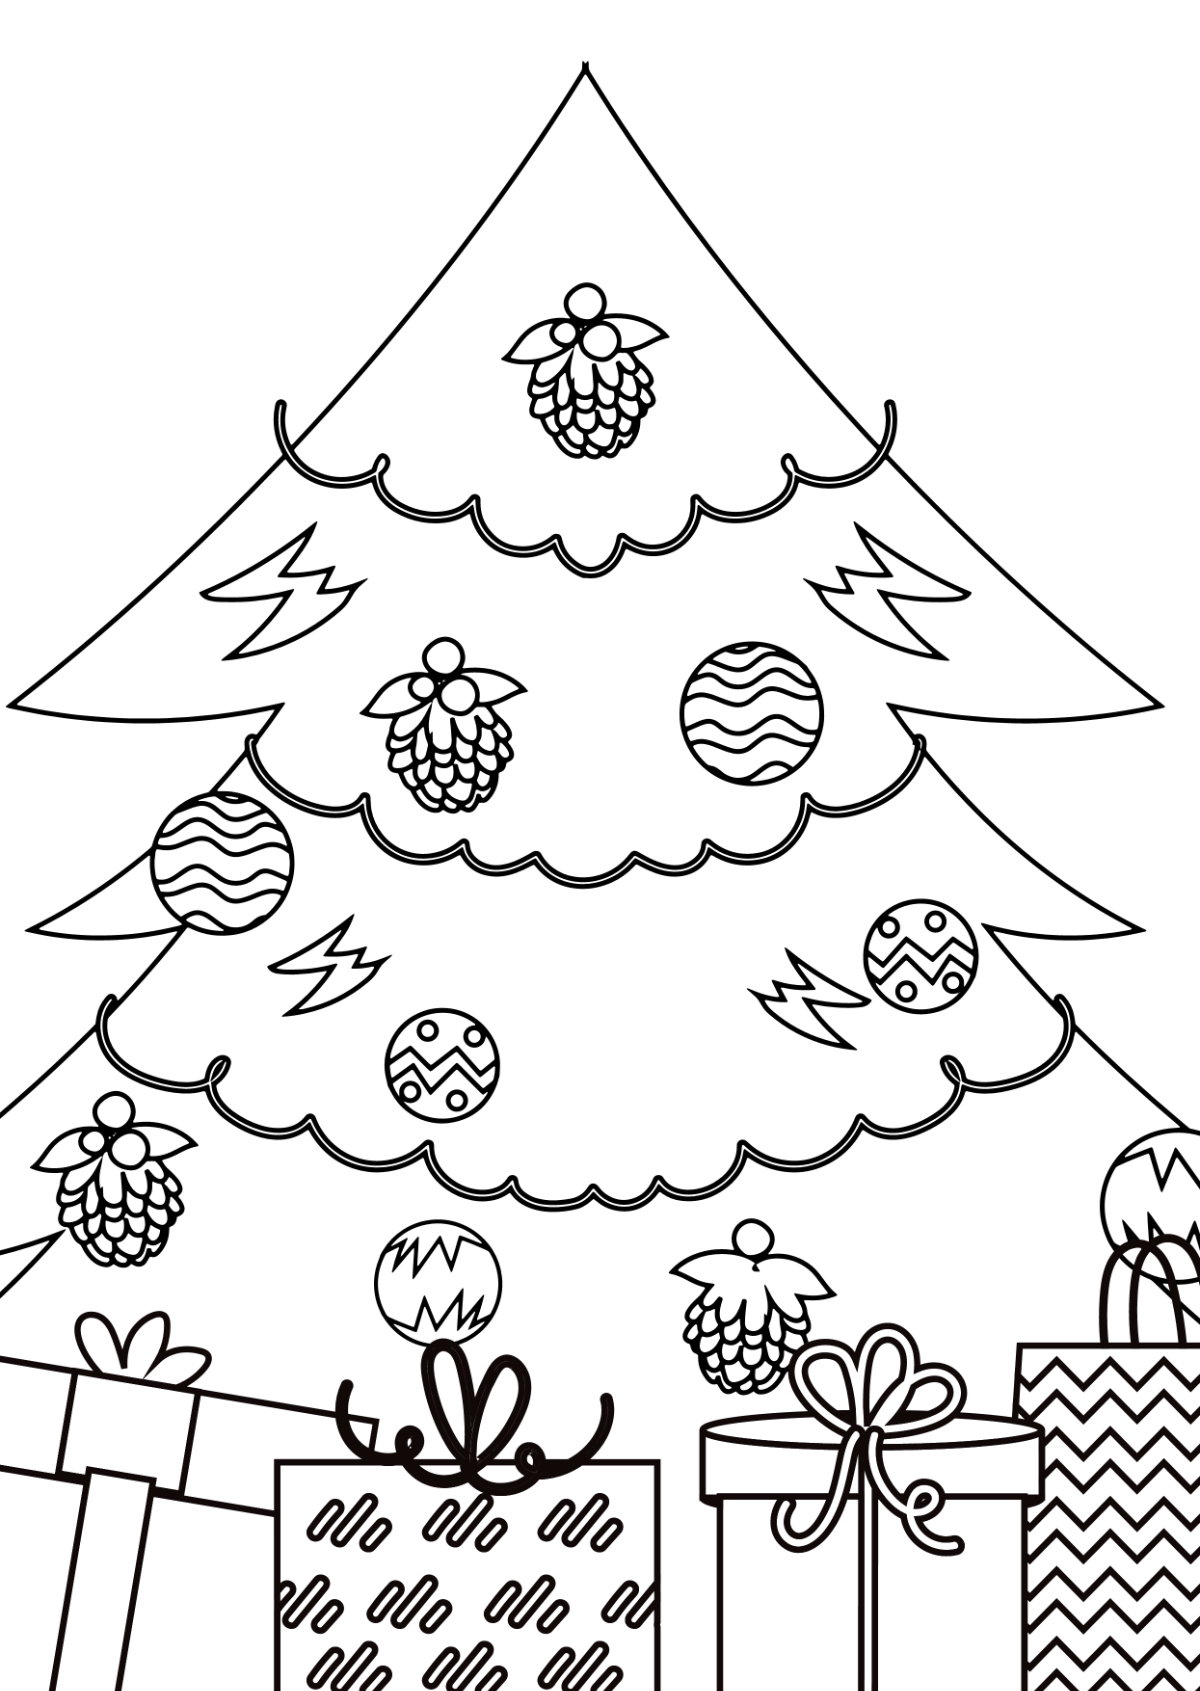 Free Christmas Drawing Template